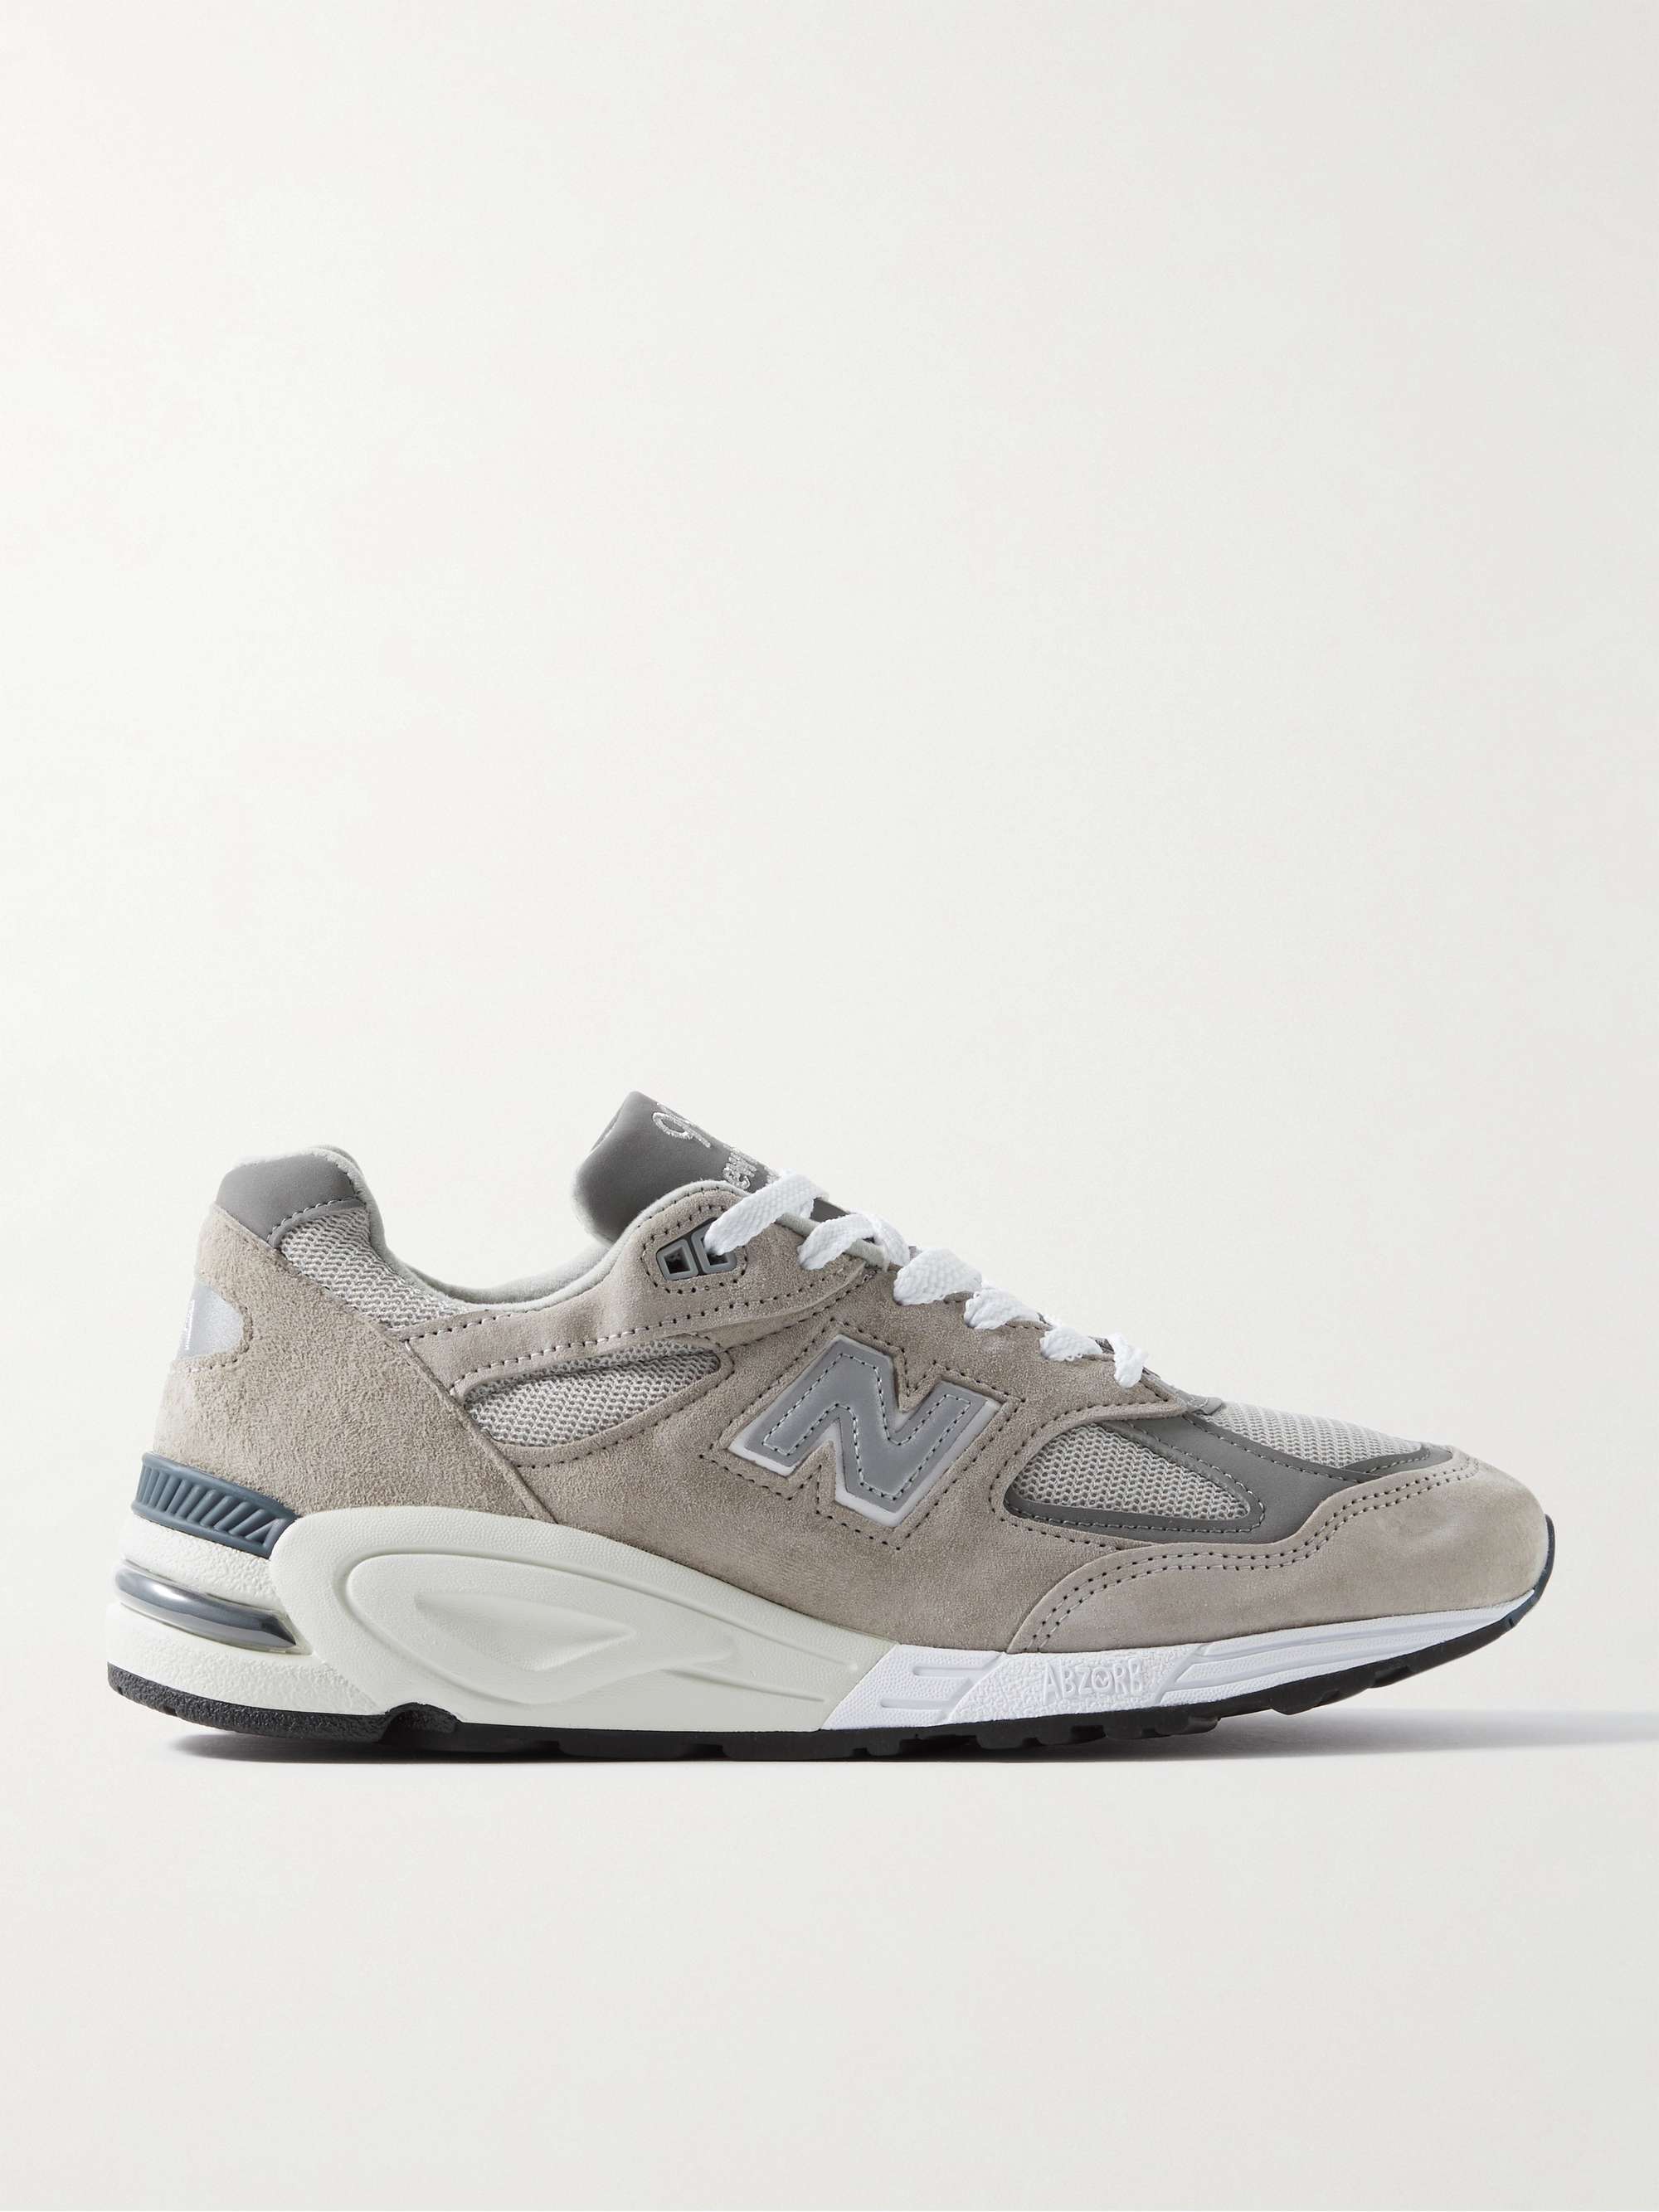 NEW BALANCE M990v2 Suede and Mesh Sneakers | MR PORTER